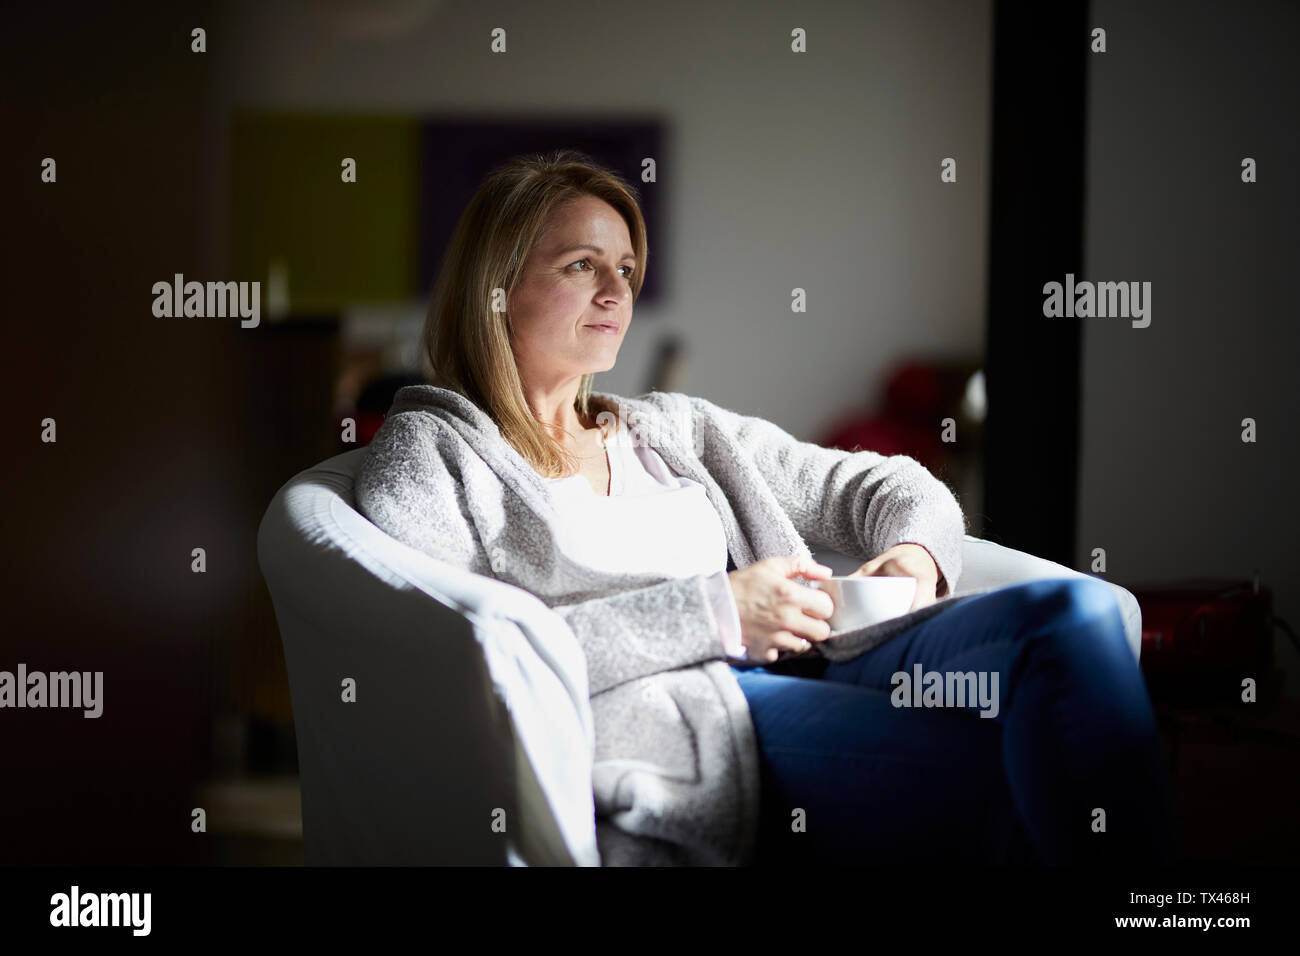 Woman sitting at home, relaxing in arm chair Stock Photo